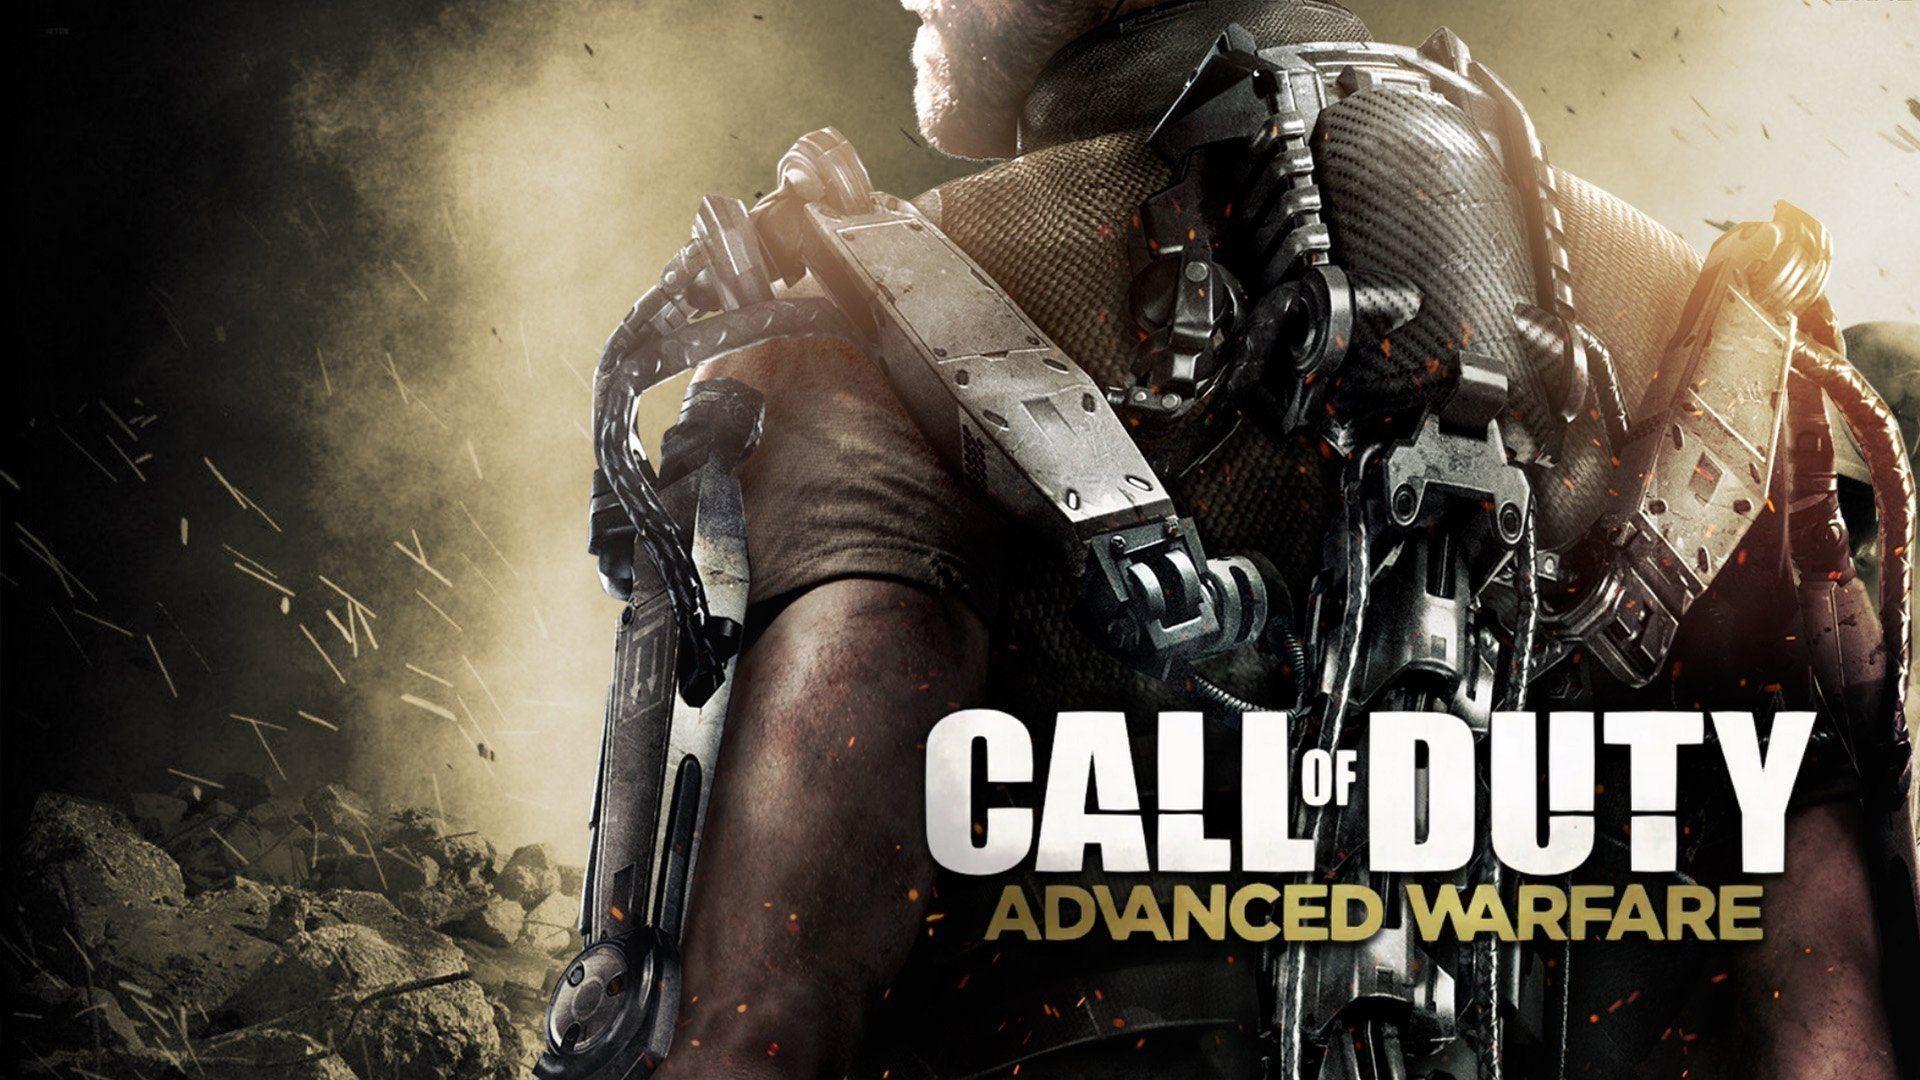 52+ Cool Call of Duty Wallpapers: HD, 4K, 5K for PC and Mobile